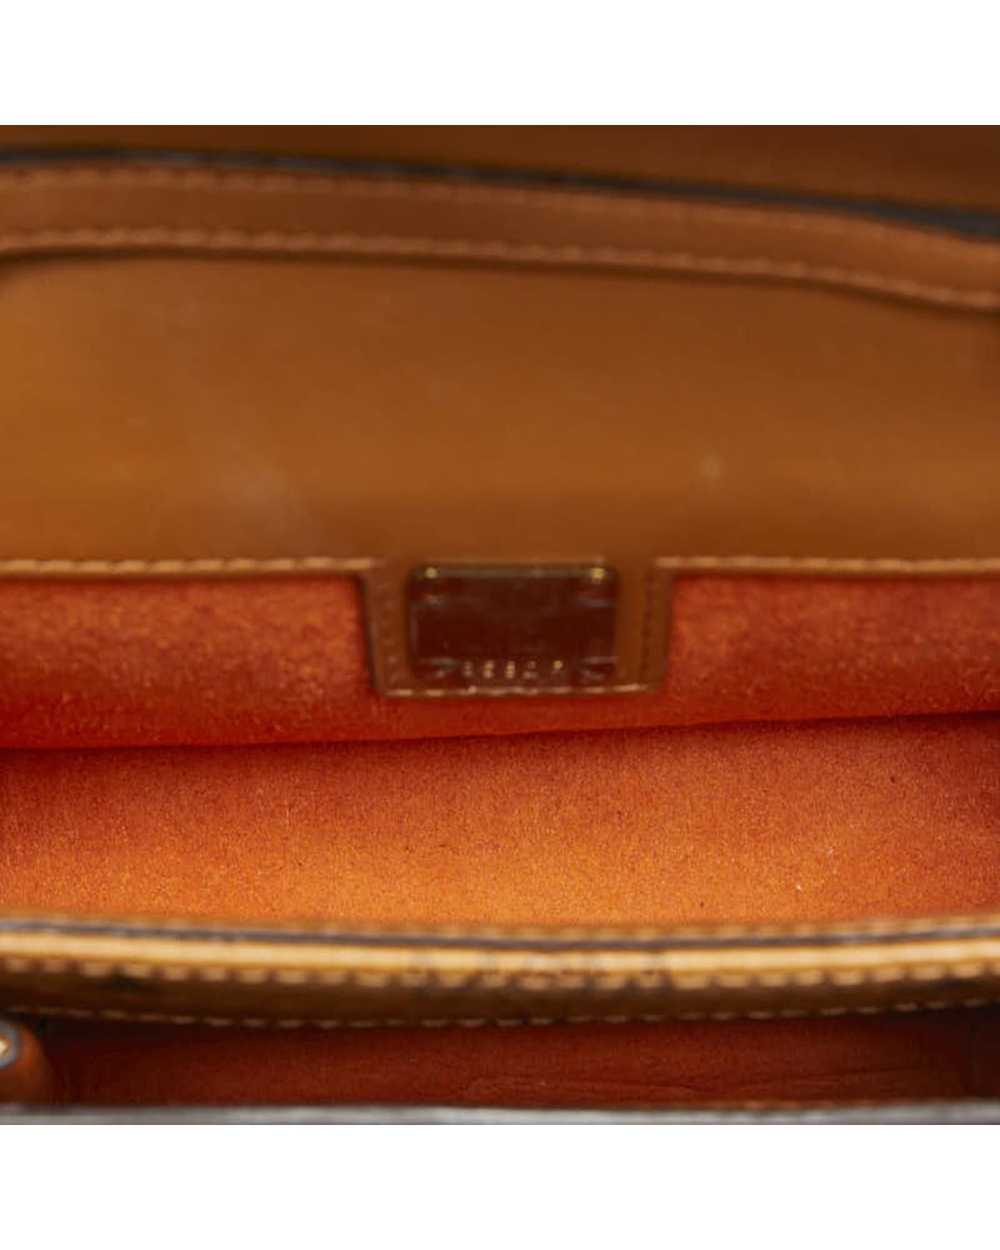 MCM Brown Leather Fanny Pack - image 5